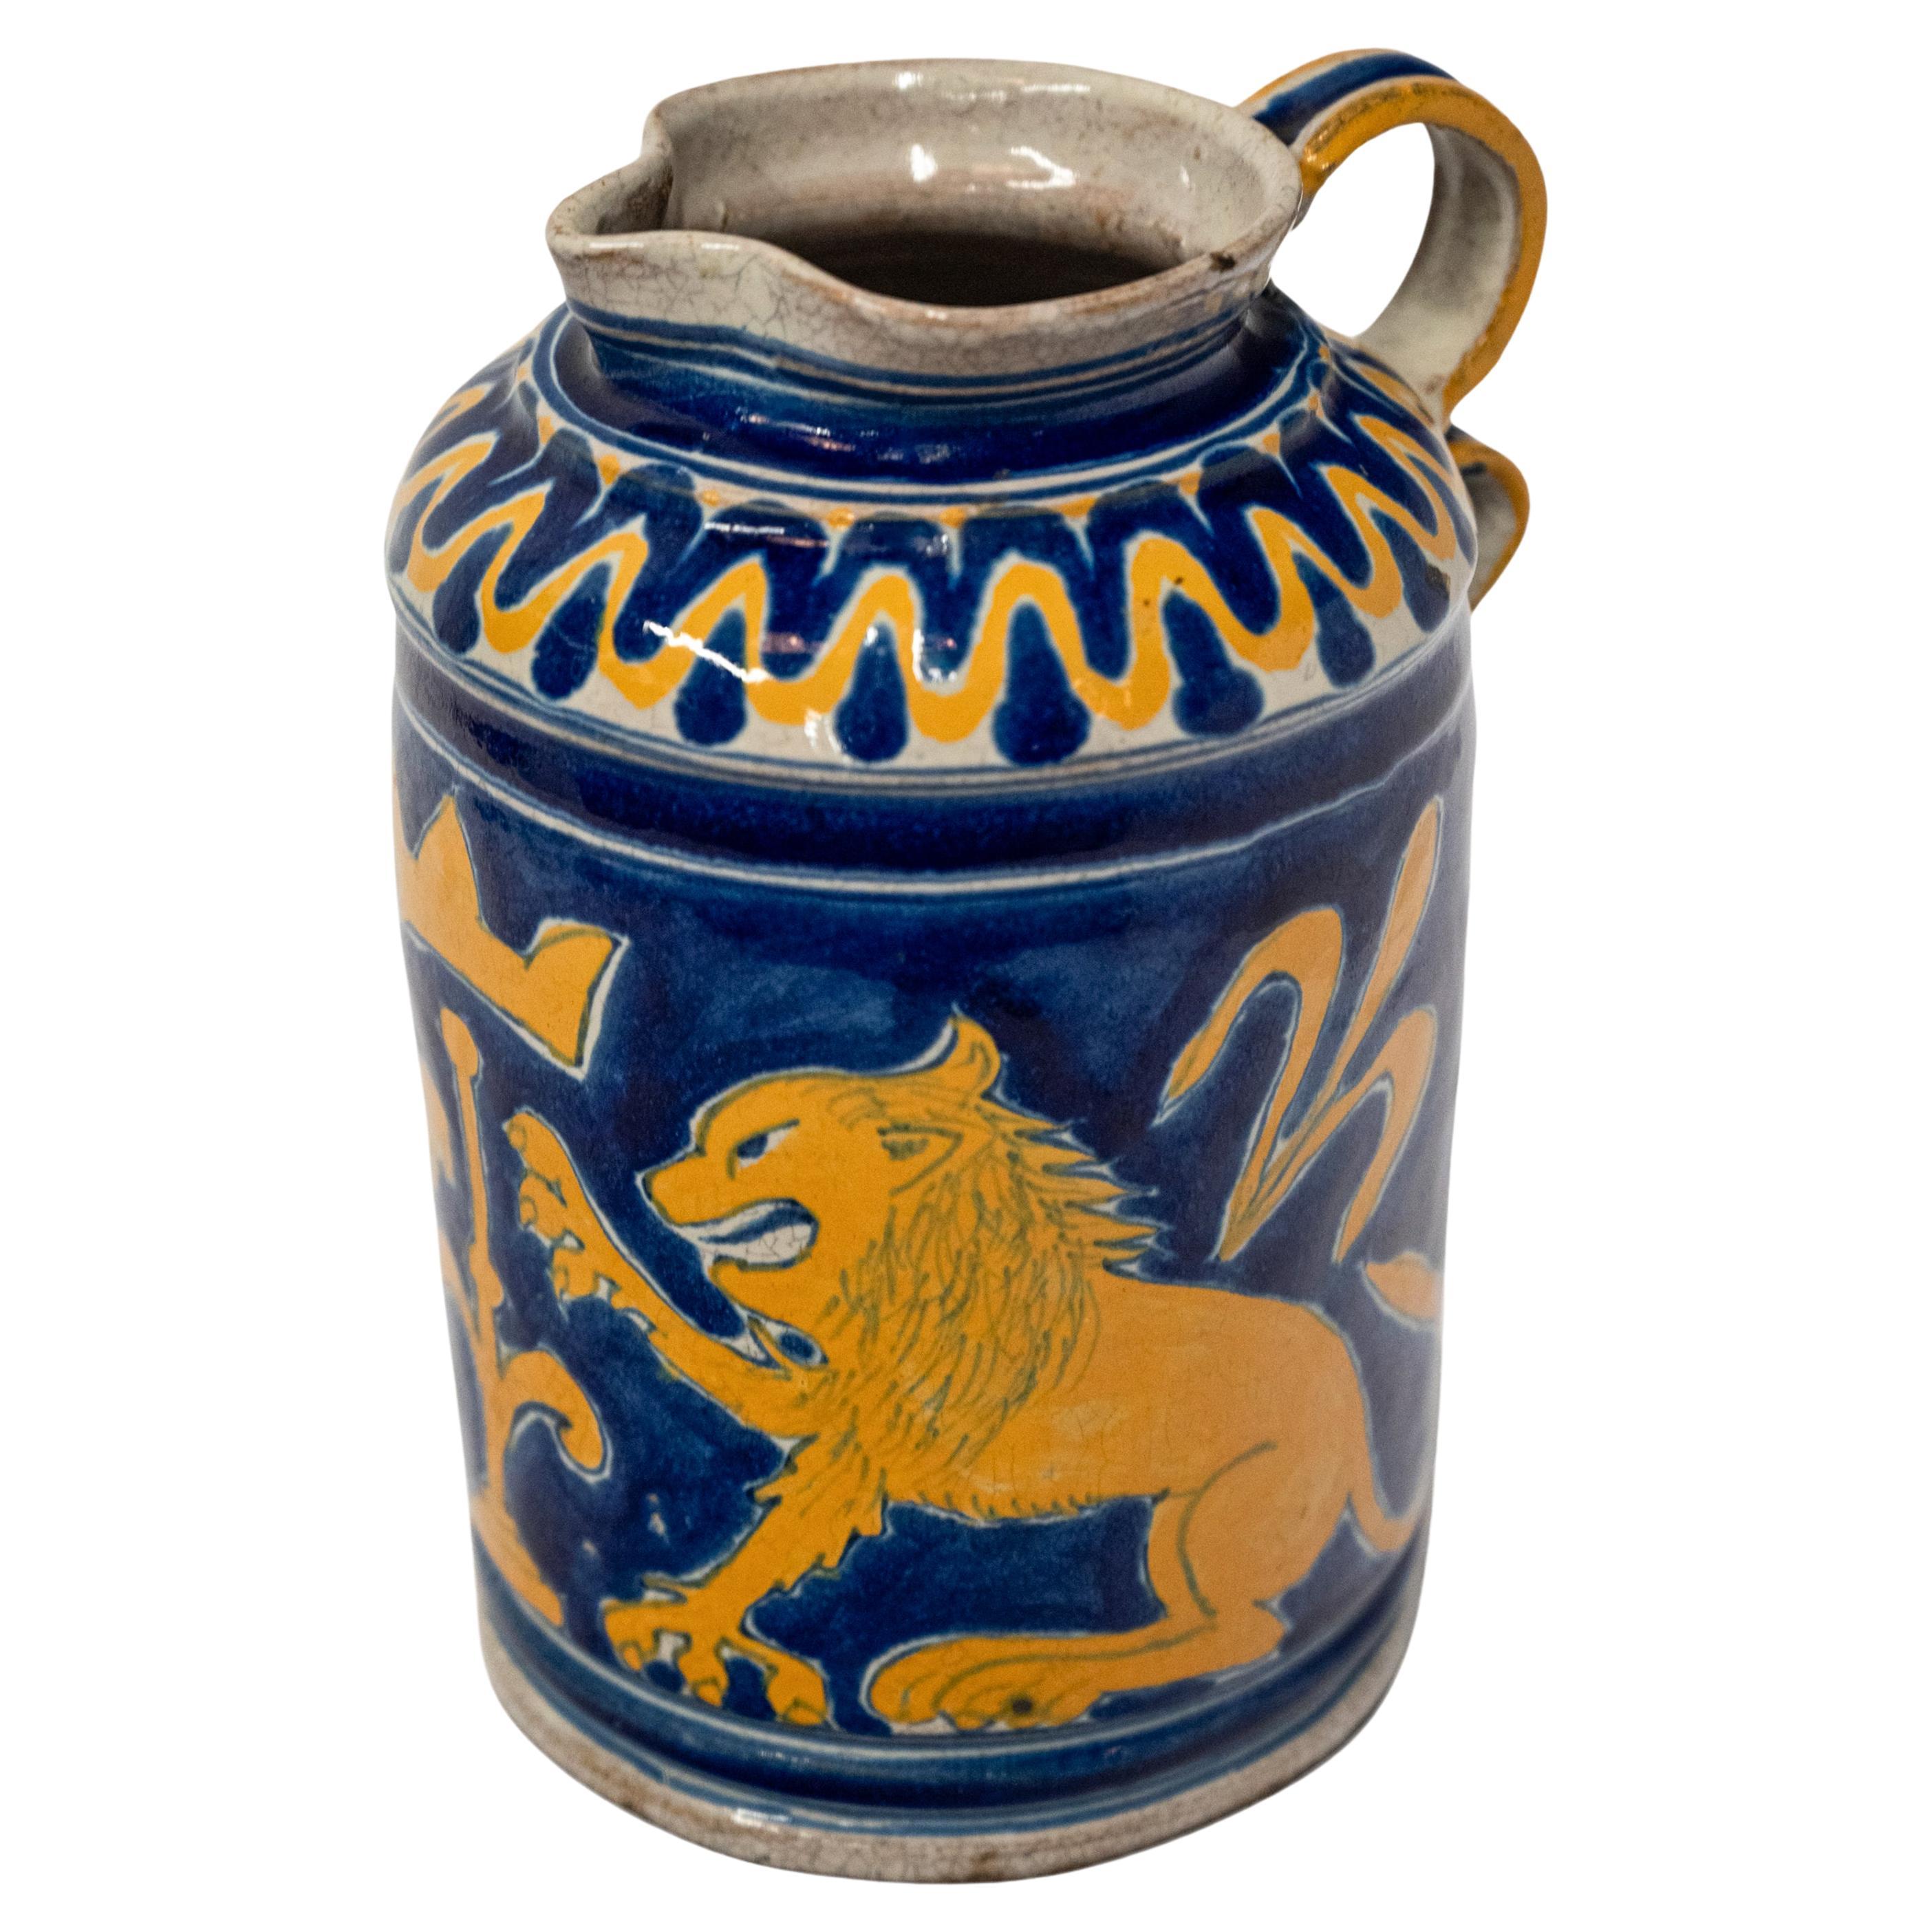 A very good antique Italian maiolica/majolica Renaissance armorial boccale or jug from the Montelupo area of Florence, circa 1600.
Typical of the tin glazed earthernware of the time this very handsome jug having a cobalt blue ground, the cream